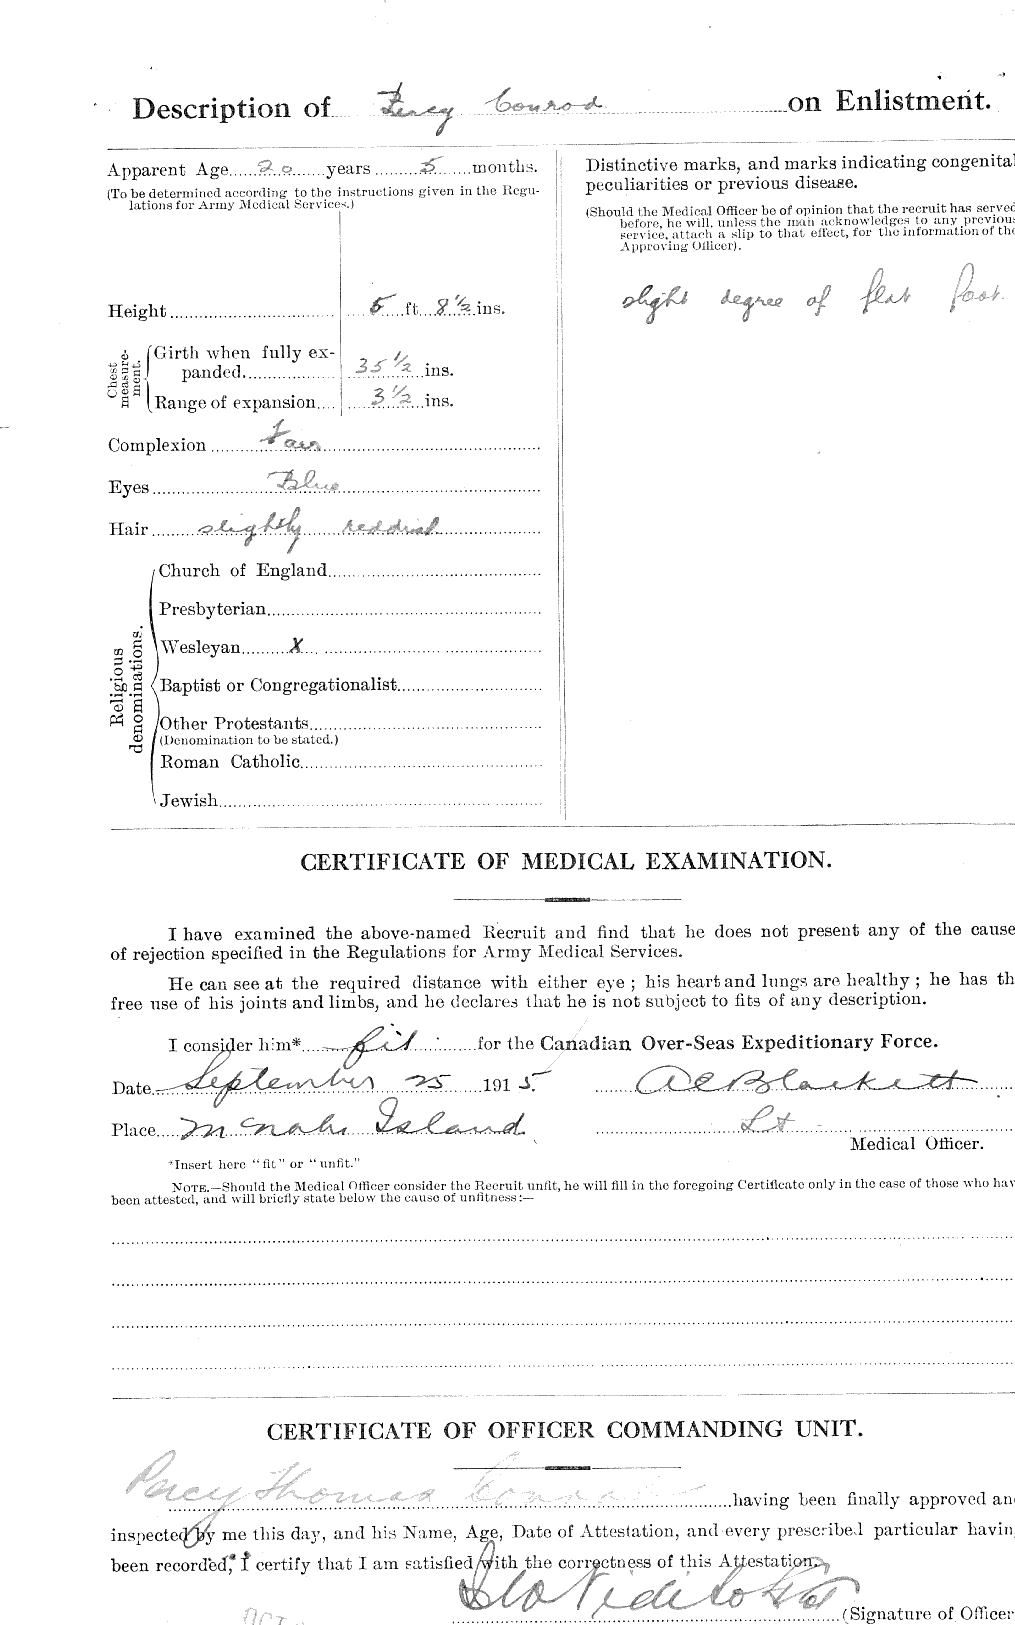 Personnel Records of the First World War - CEF 036146b